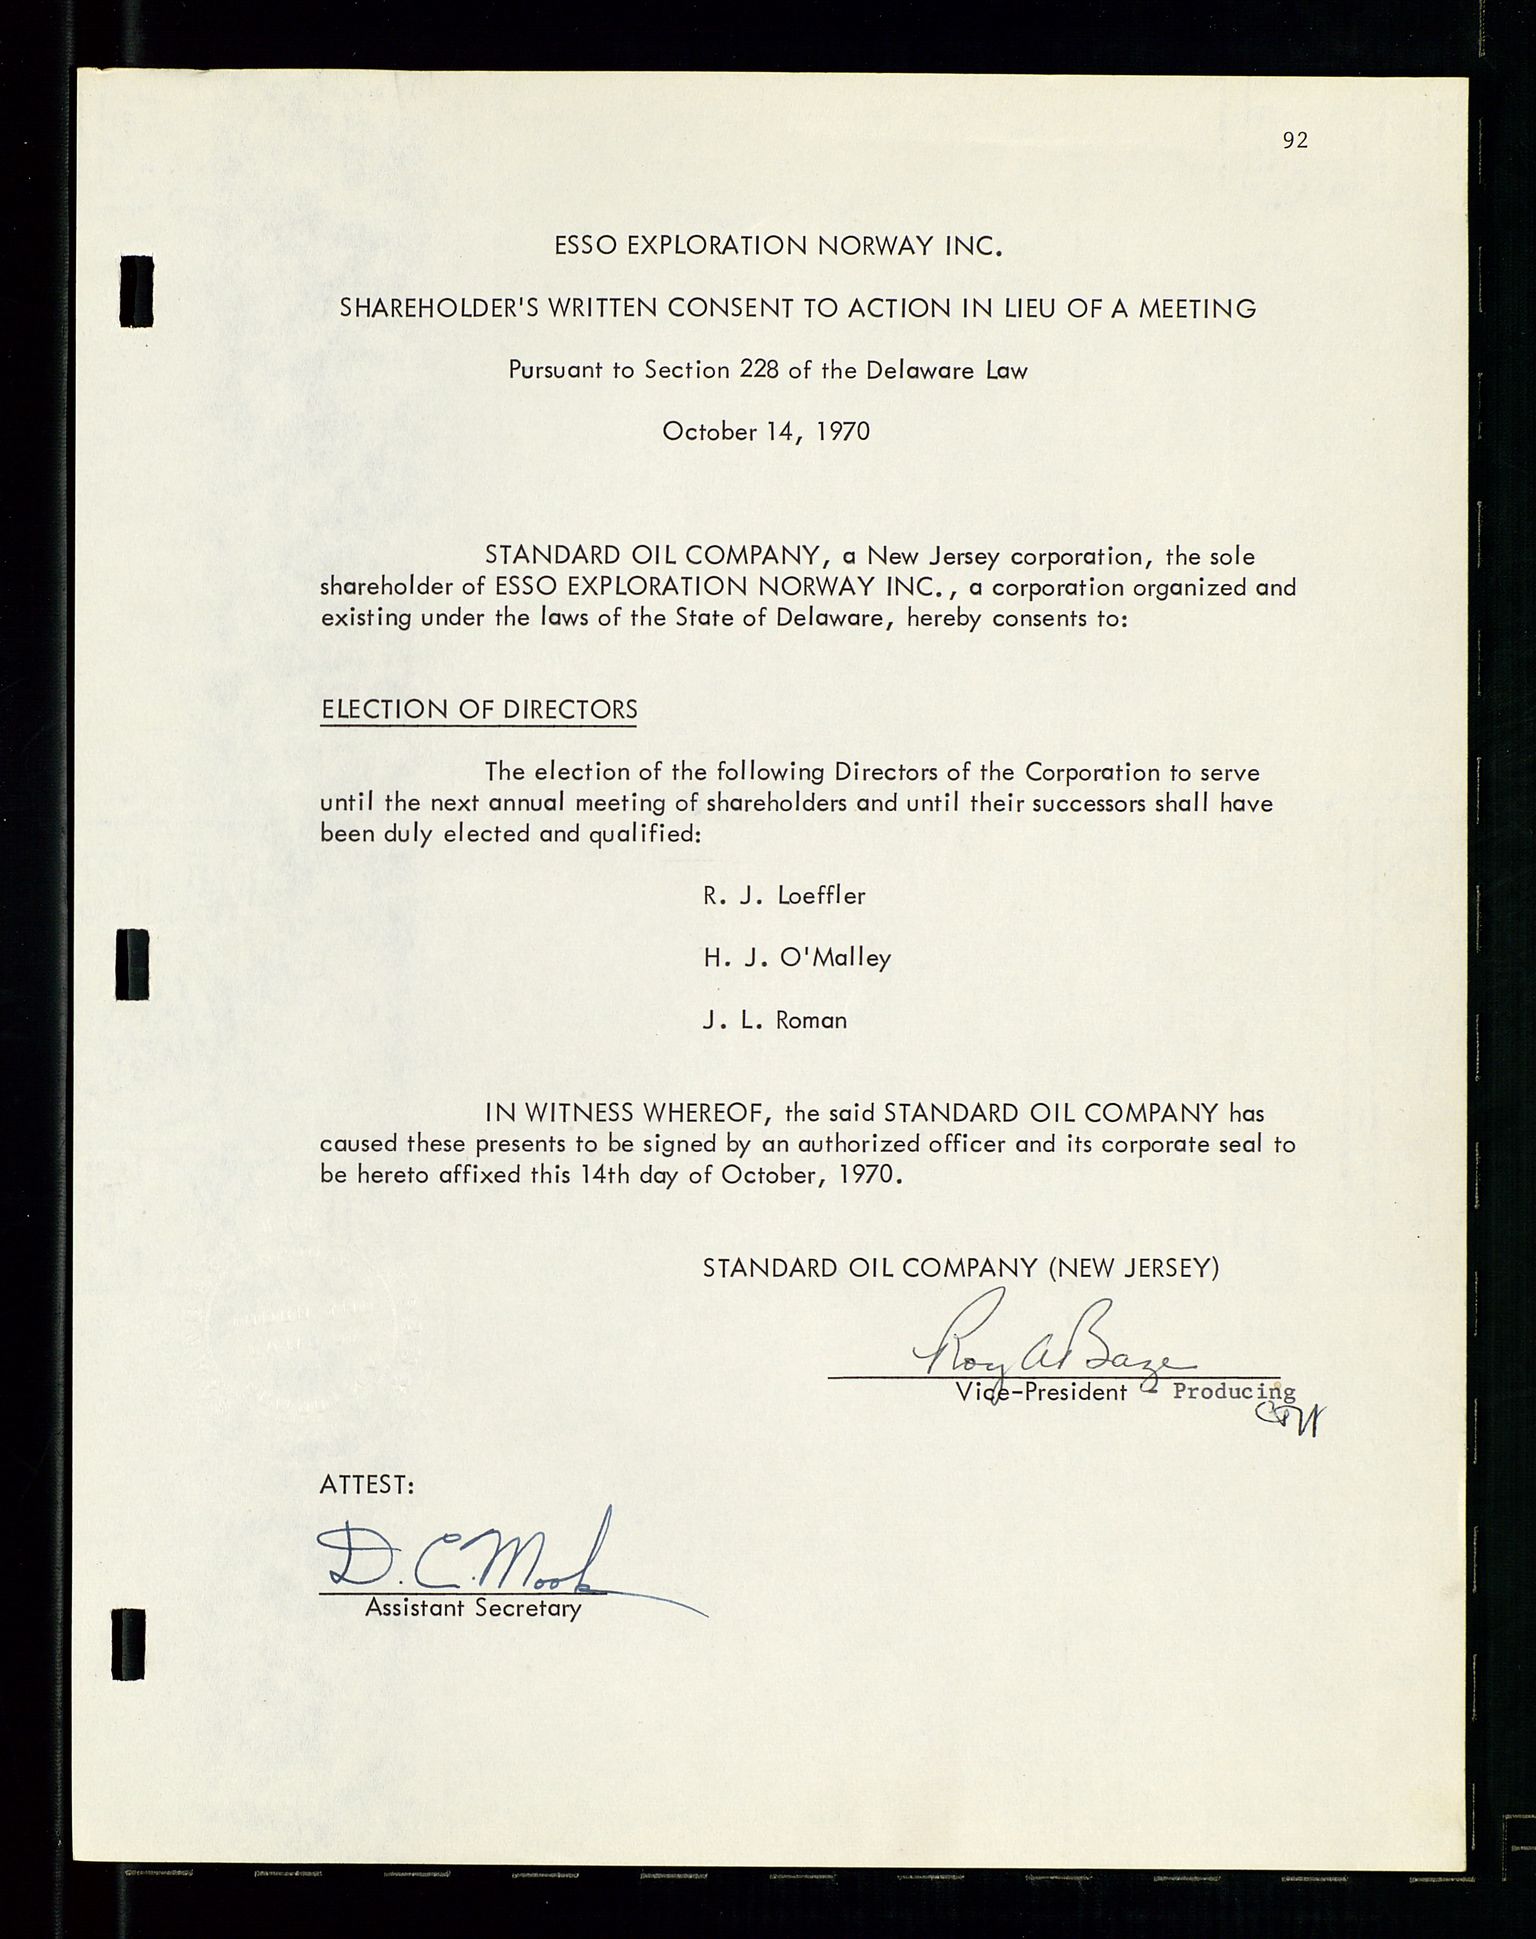 Pa 1512 - Esso Exploration and Production Norway Inc., SAST/A-101917/A/Aa/L0001/0001: Styredokumenter / Corporate records, By-Laws, Board meeting minutes, Incorporations, 1965-1975, p. 92